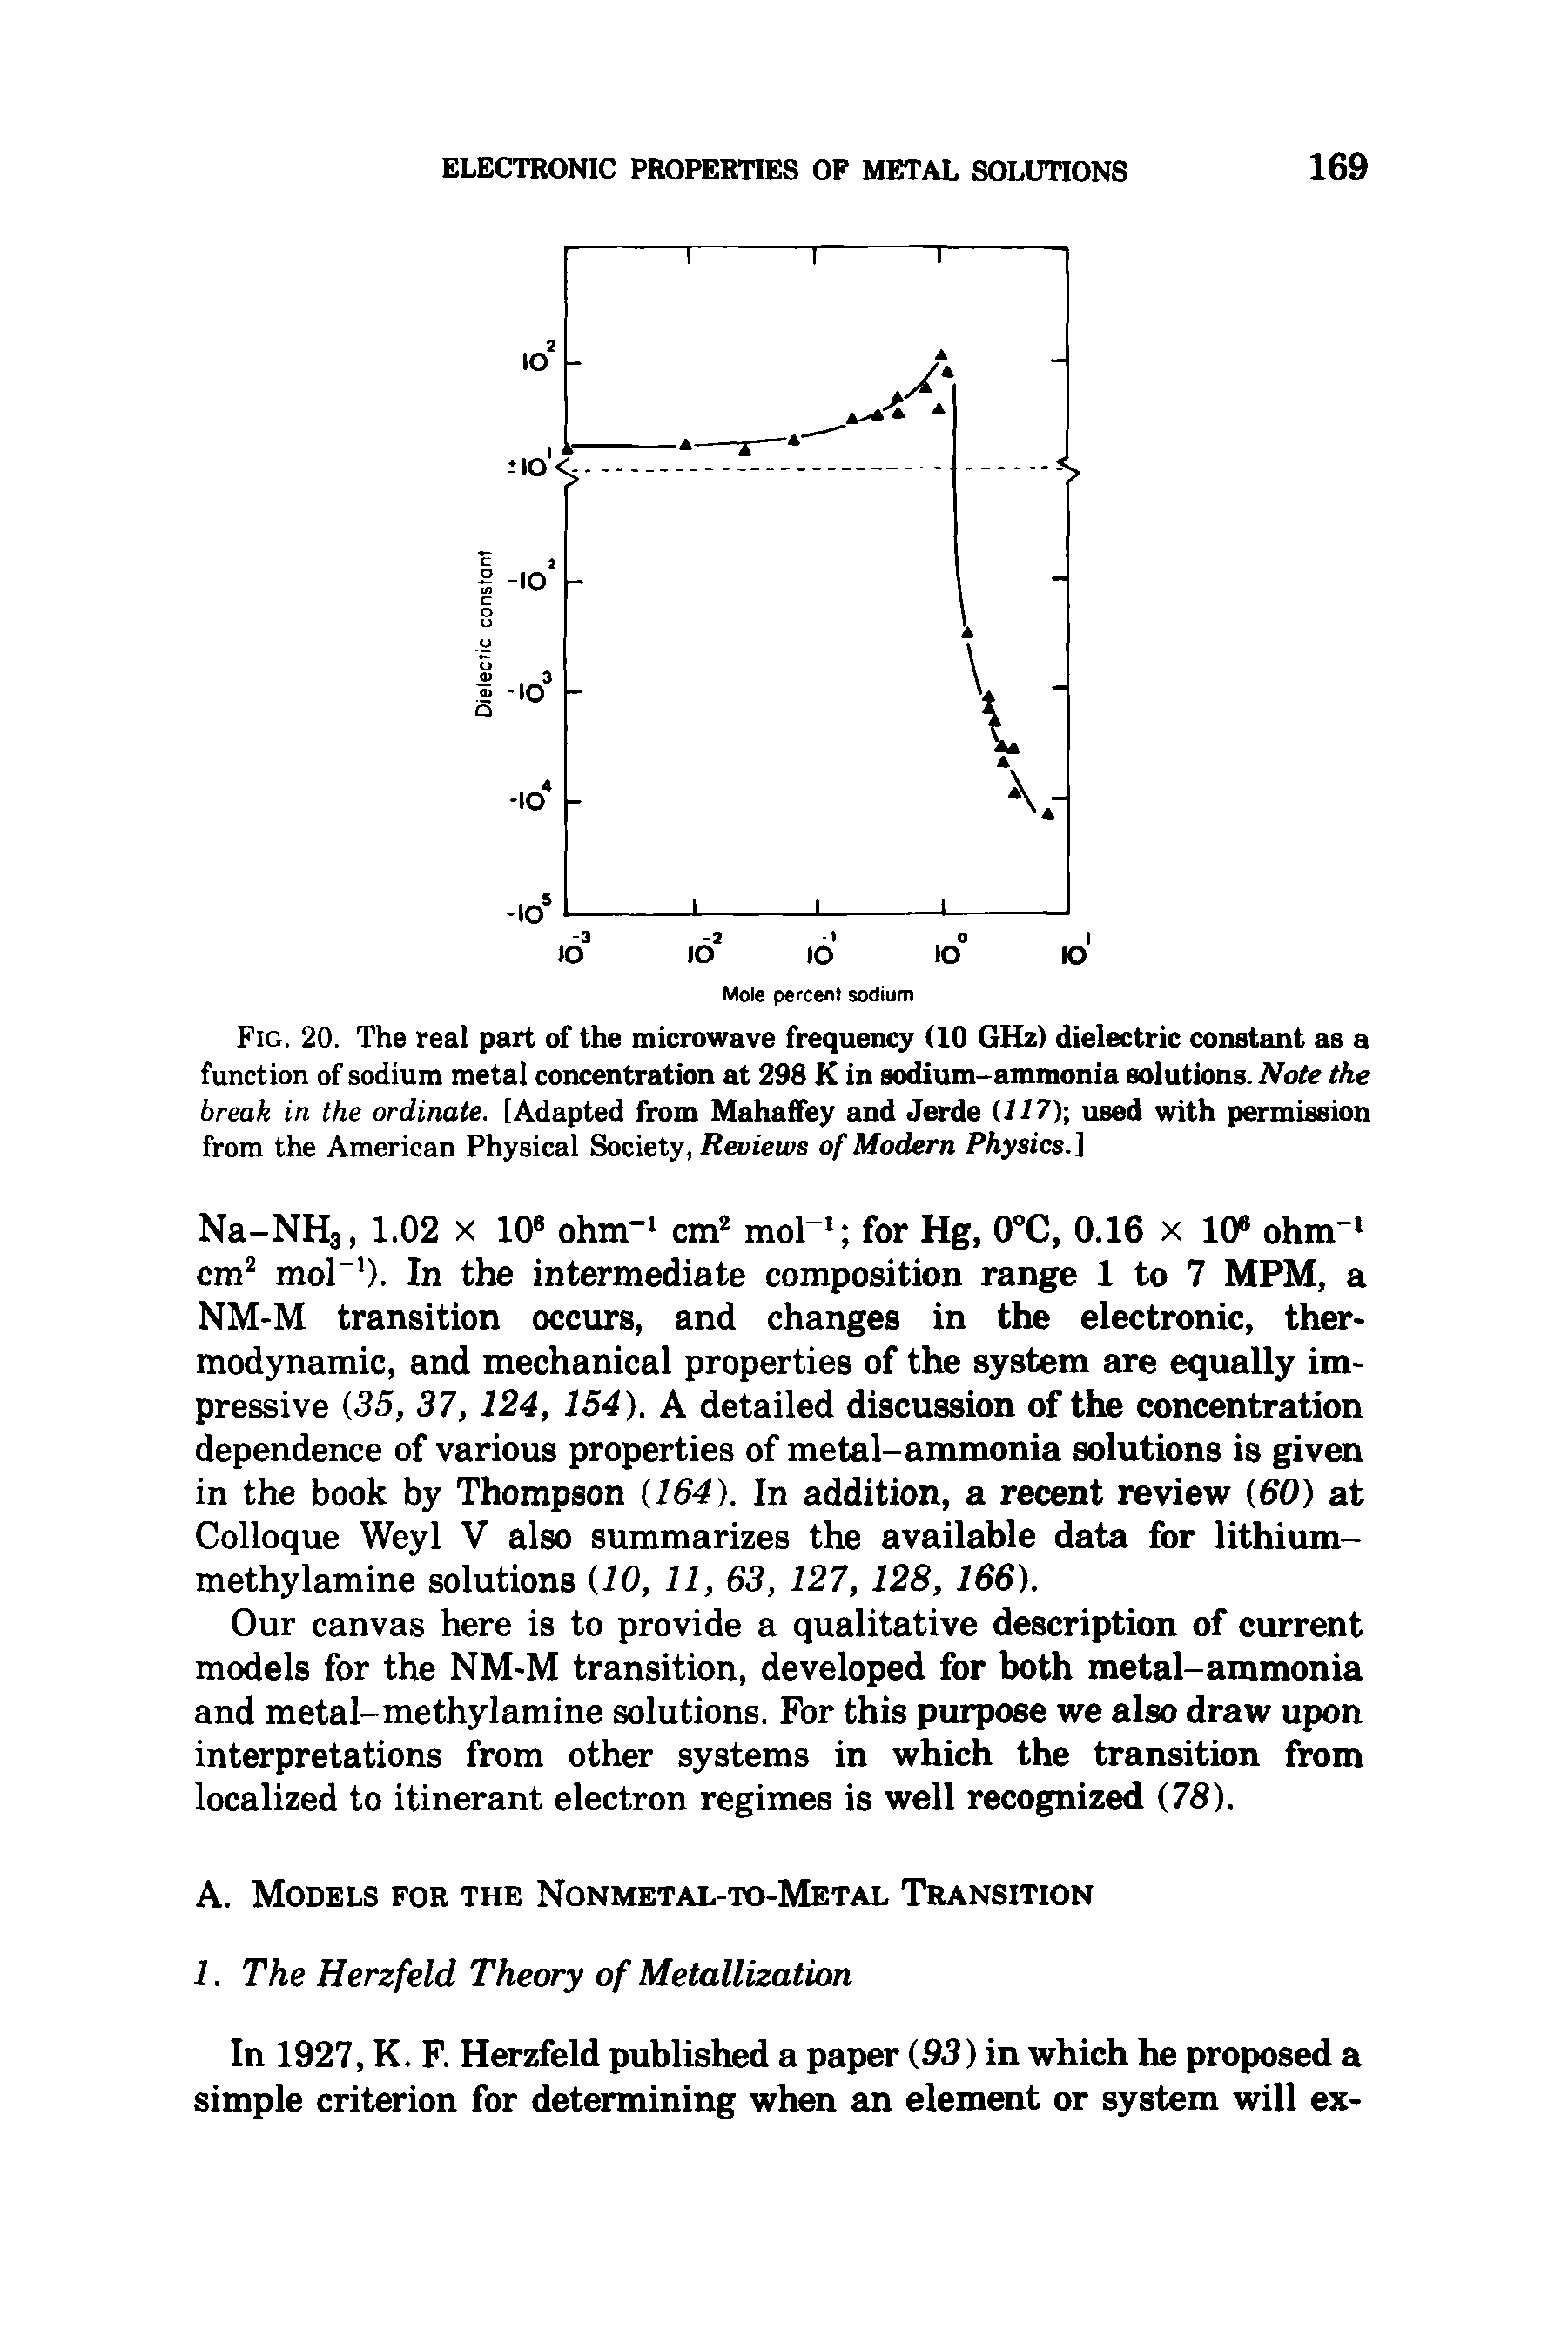 Fig. 20. The real part of the microwave frequency (10 GHz) dielectric constant as a function of sodium metal concentration at 298 K in sodium-ammonia solutions. Note the break in the ordinate. [Adapted from Mahaffey and Jerde (117) used with permission from the American Physical Society, Reviews of Modern Physics.]...